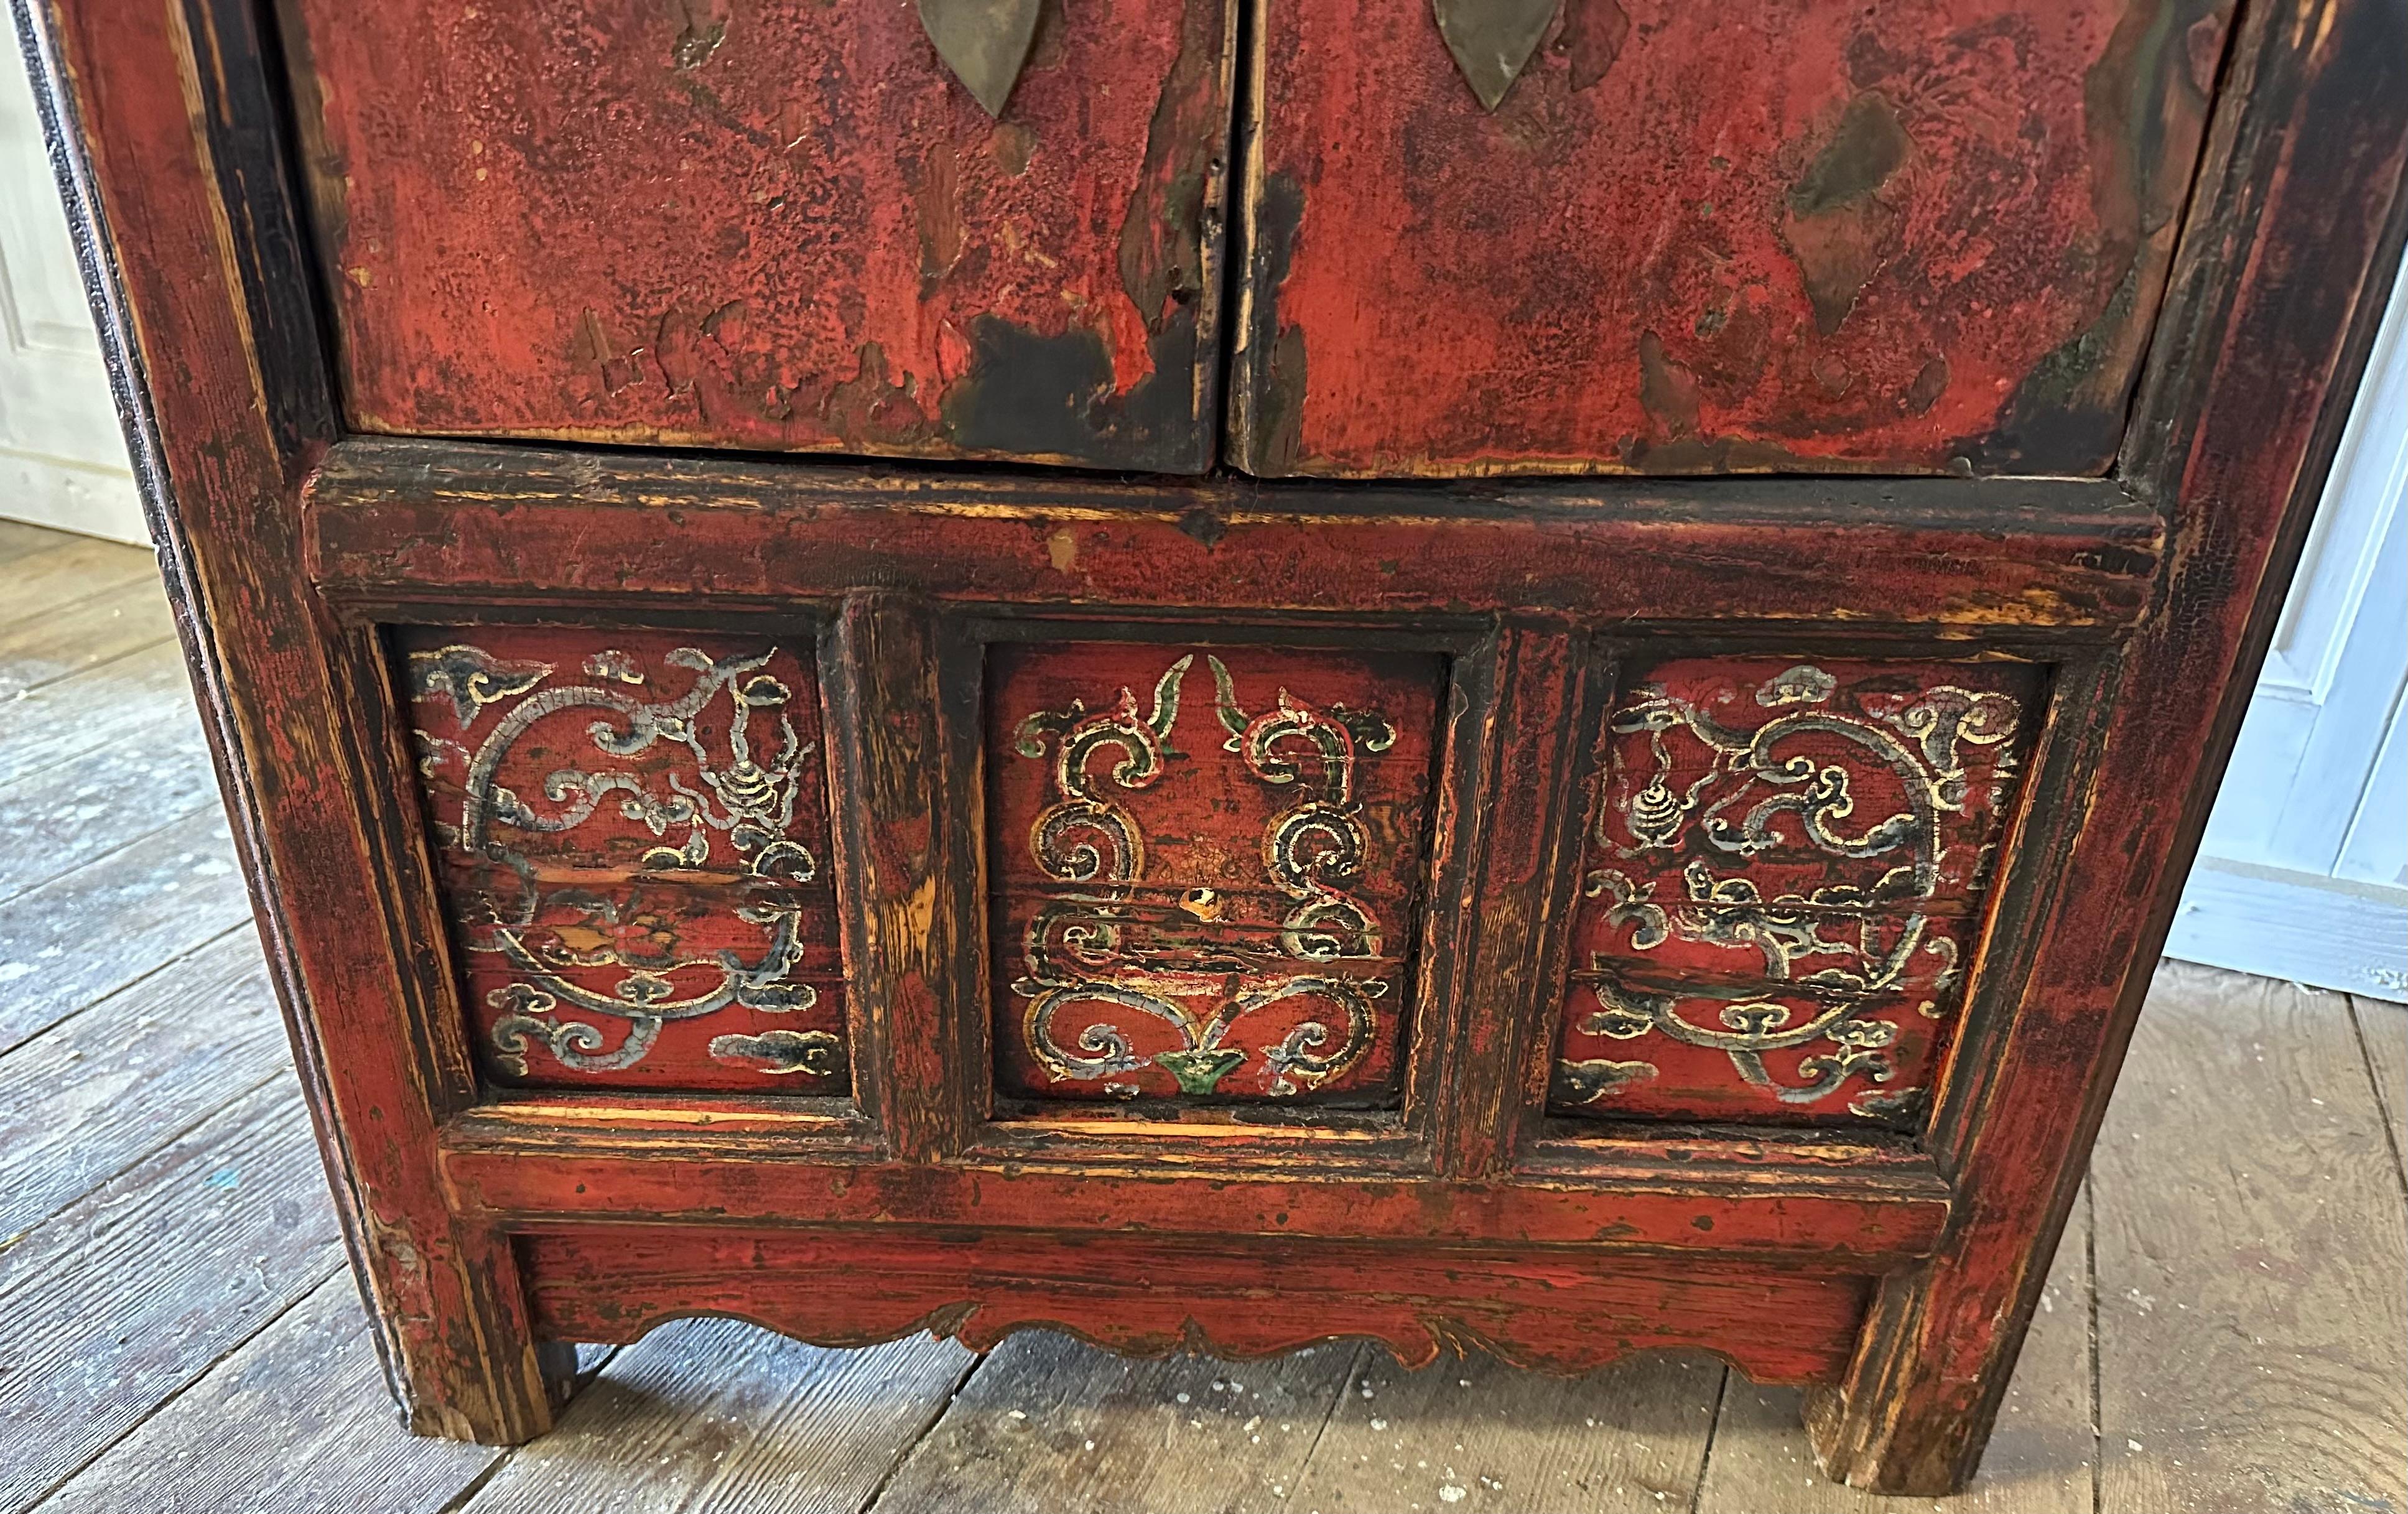 Late Qing Dynasty Low Chinese Red Lacquer Bedside Cabinet In Fair Condition For Sale In Sheffield, MA